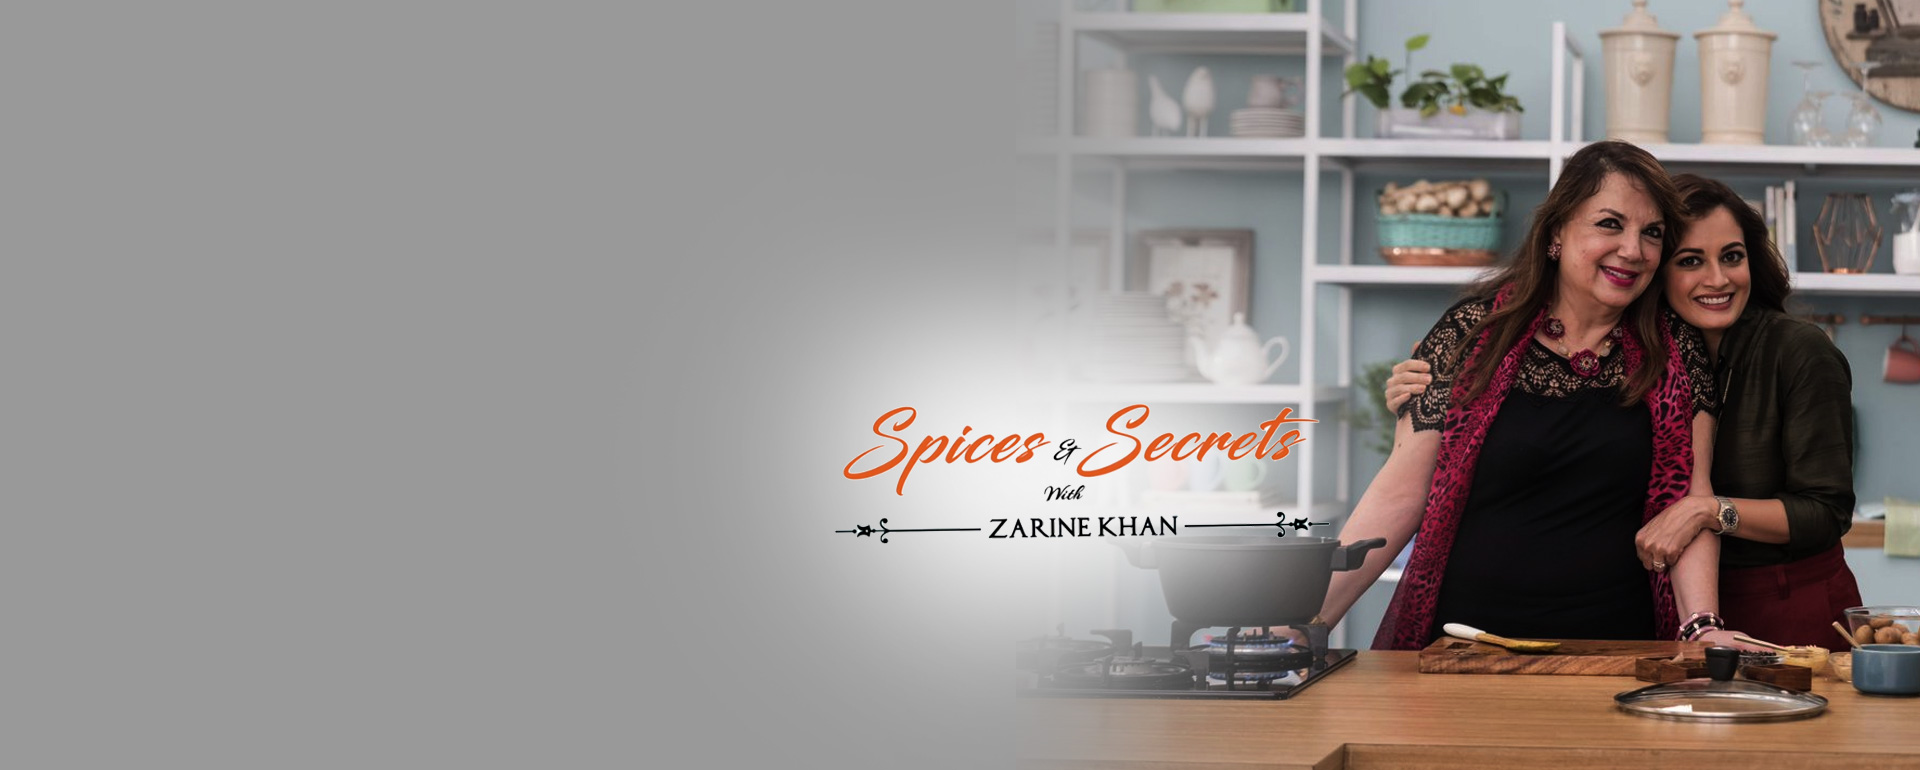 SPICES AND SECRETS WITH ZARINE KHAN